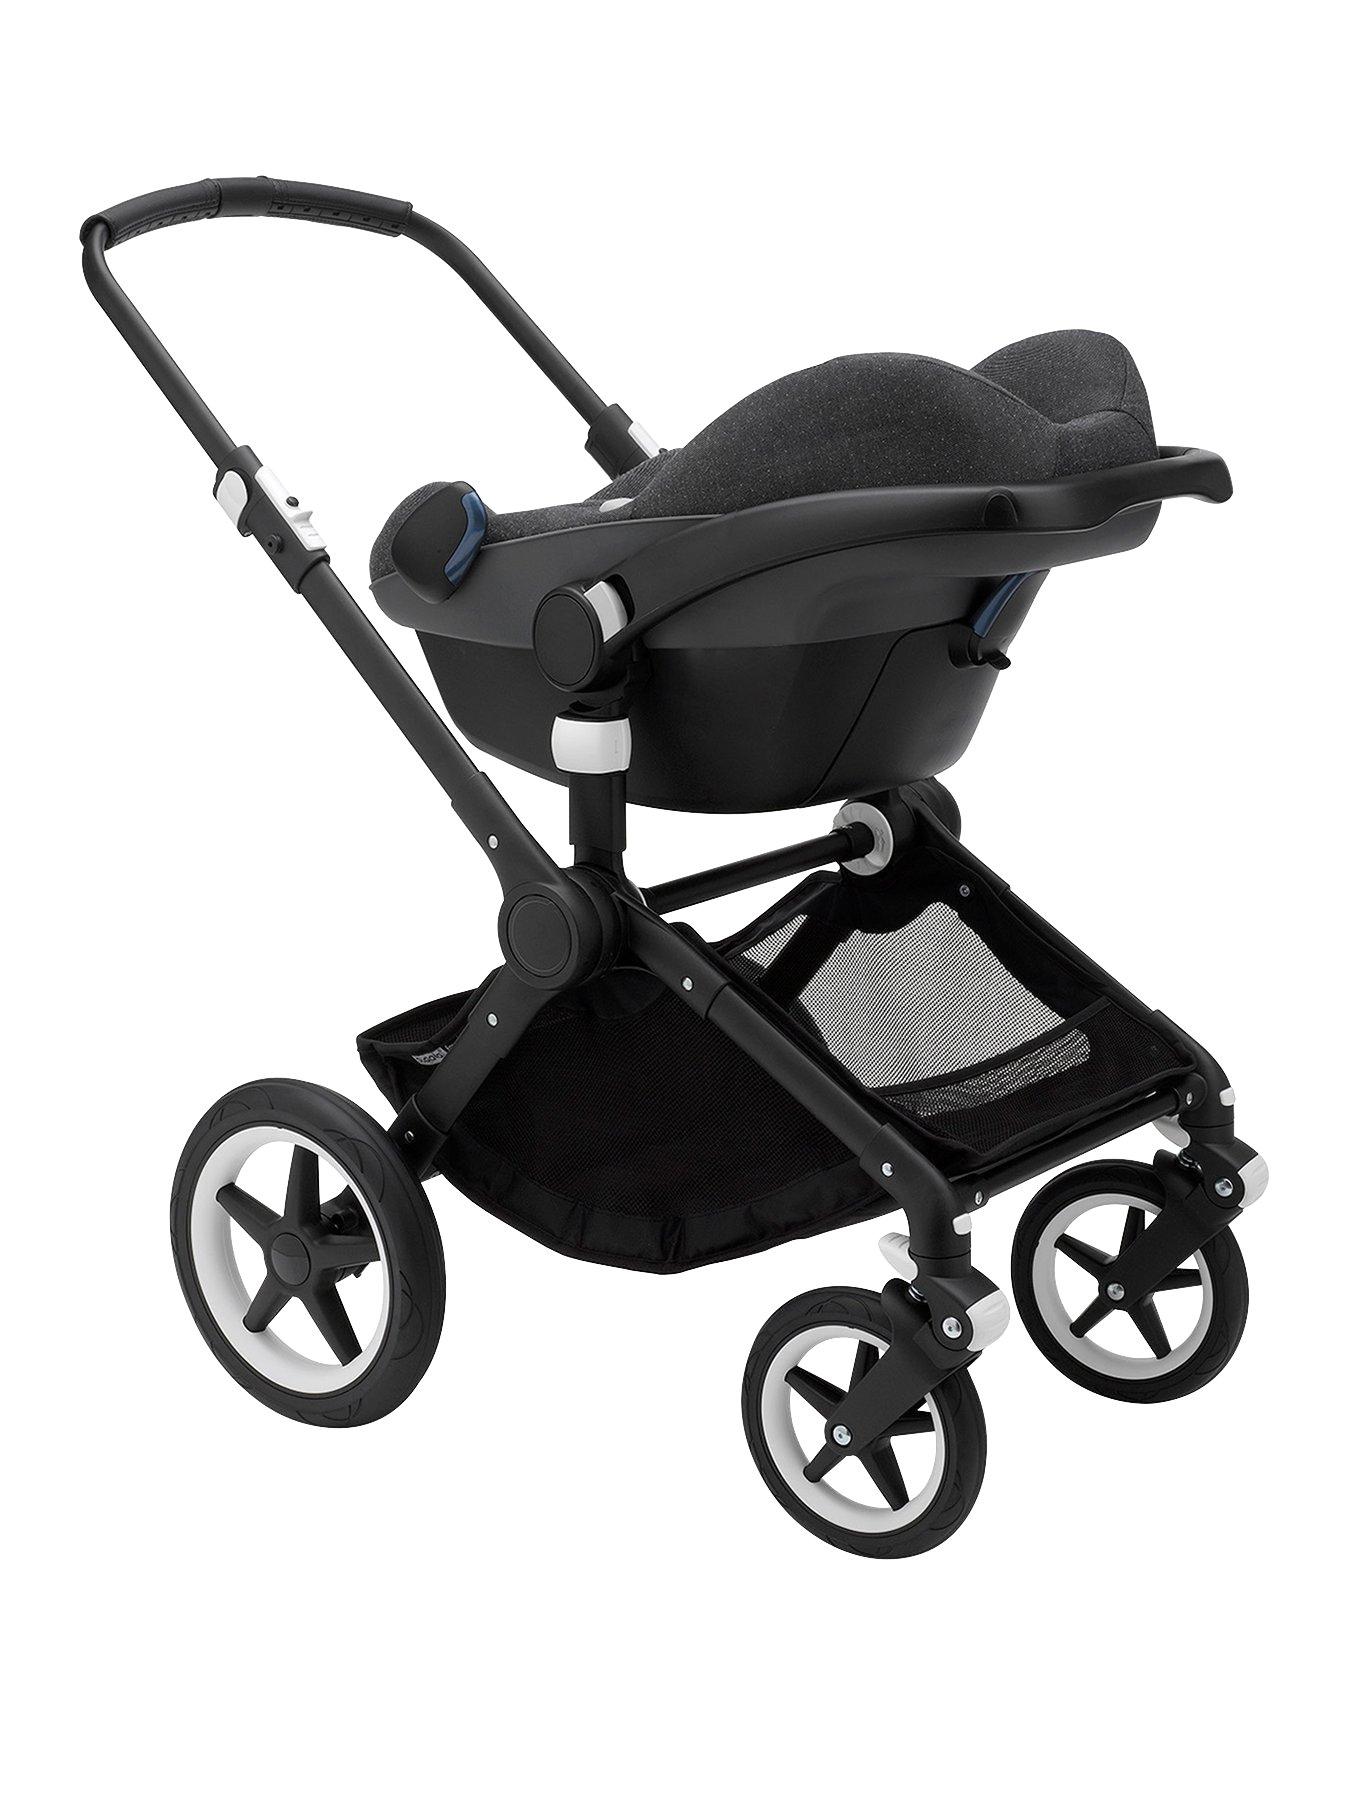 bugaboo joie adapter